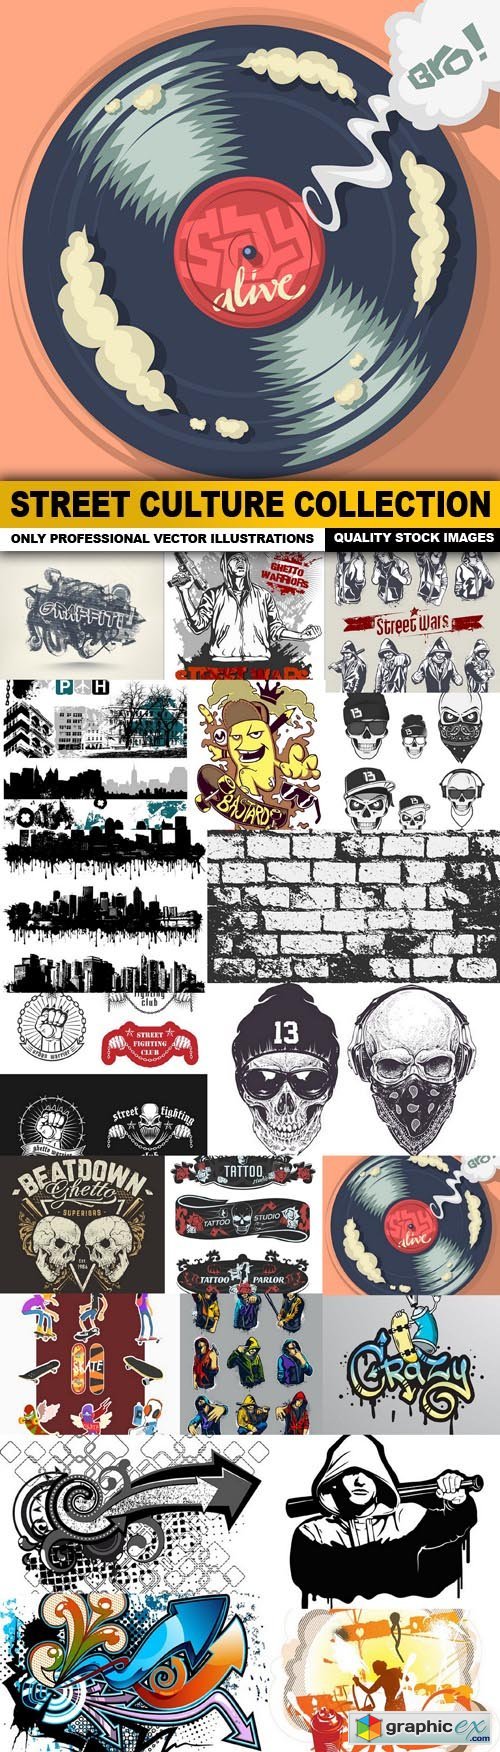 Street Culture Collection